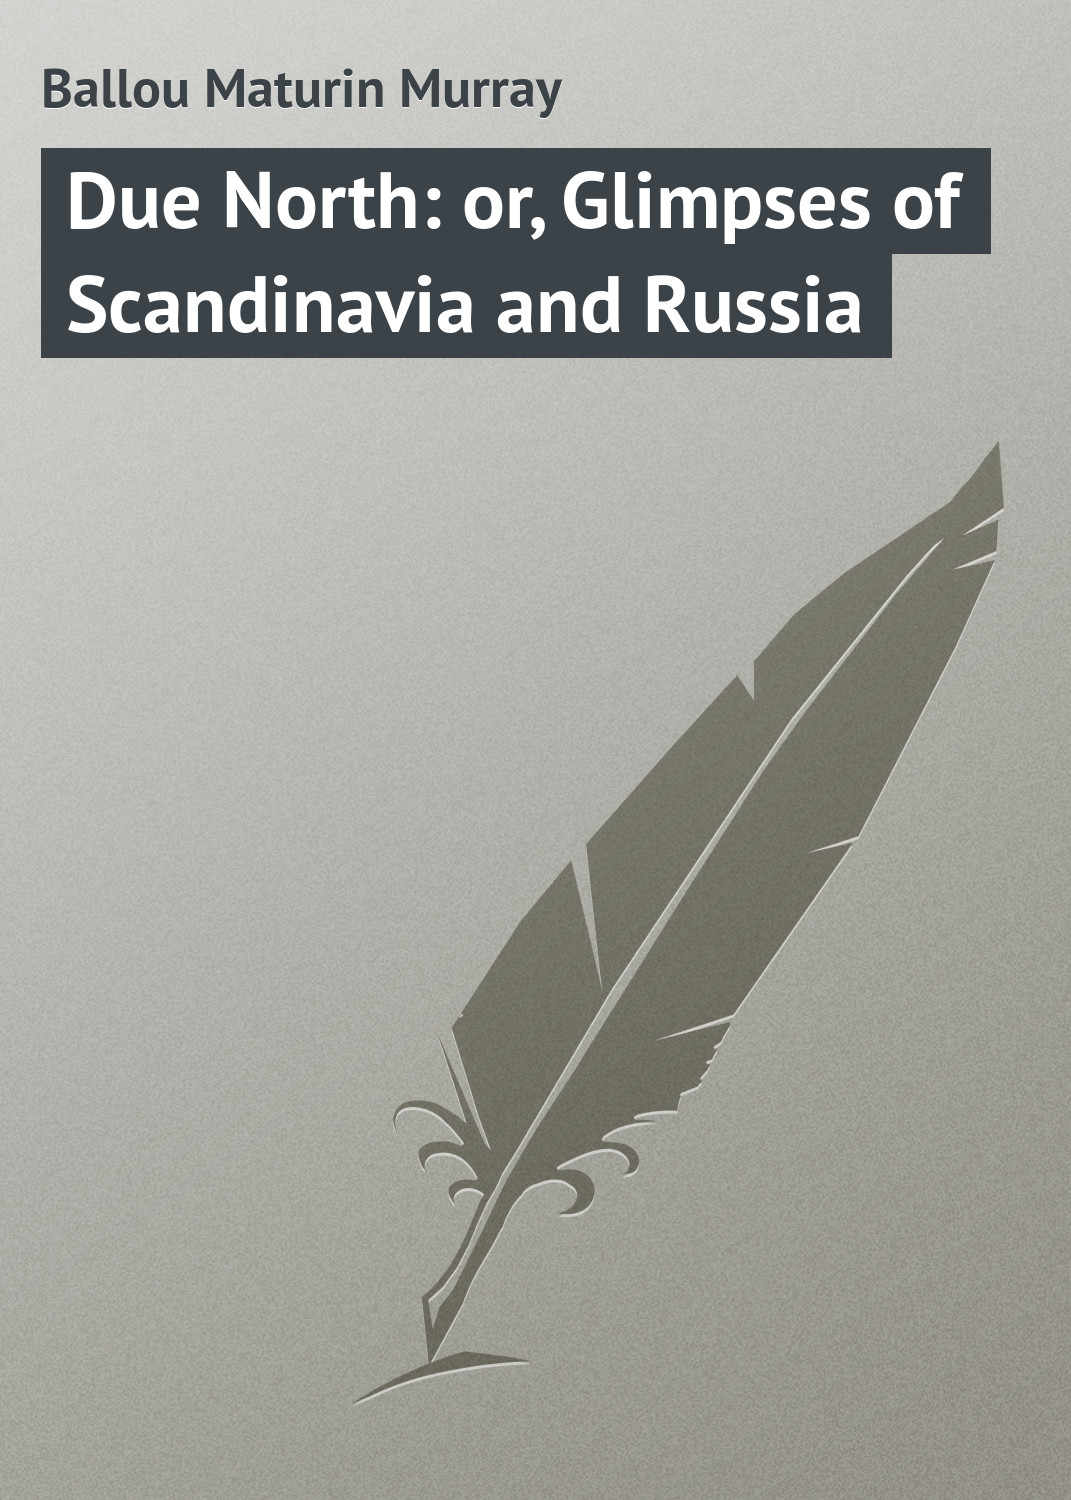 Due North: or, Glimpses of Scandinavia and Russia